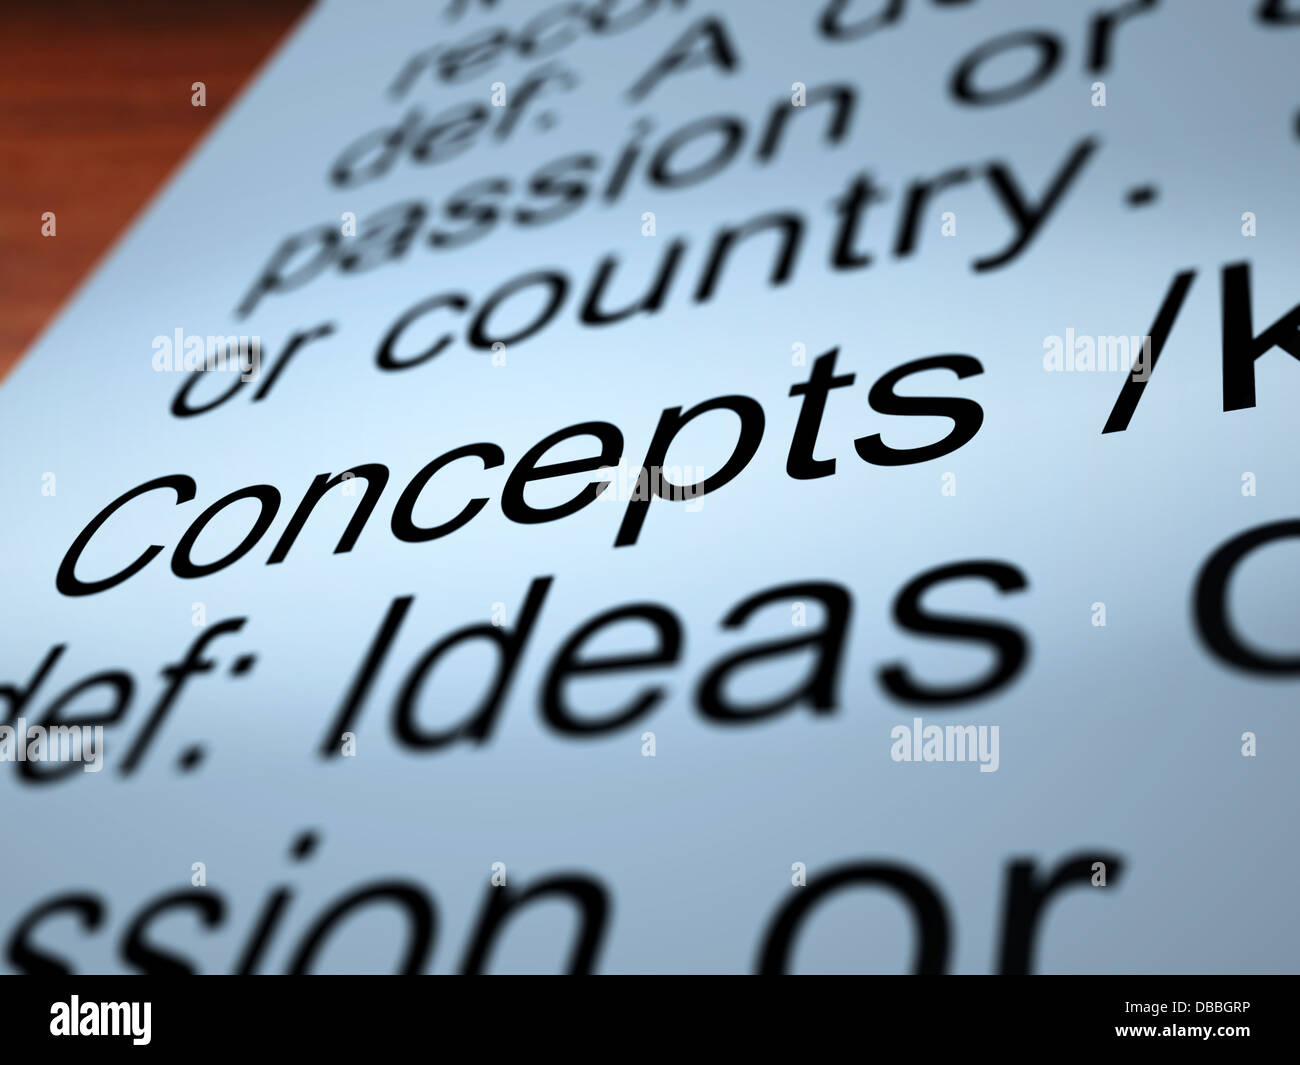 Concepts Definition Closeup Showing Ideas Or Invention Stock Photo